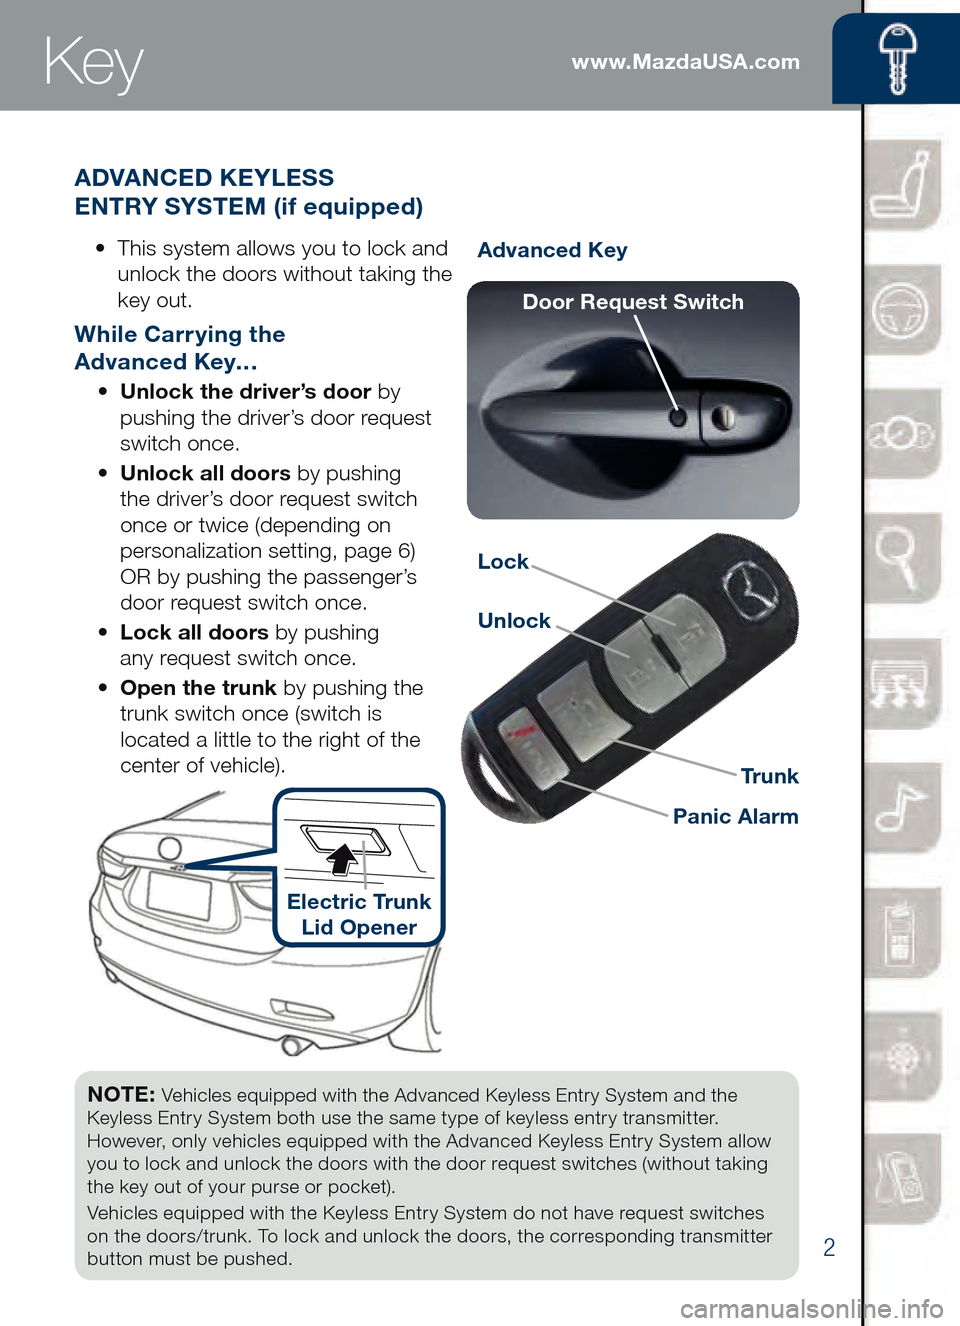 MAZDA MODEL 6 2014  Smart Start Guide (in English) 2
www.MazdaUSA.com
Advanced Key
Lock
UnlockPanic AlarmTrunk
AD
VANCE D KEYL ESS  
ENTRY SYSTEM  (if equipped)
•		 This	 system	 allows	you	to	lock	 and	
unlock the doors without taking the 
key out.